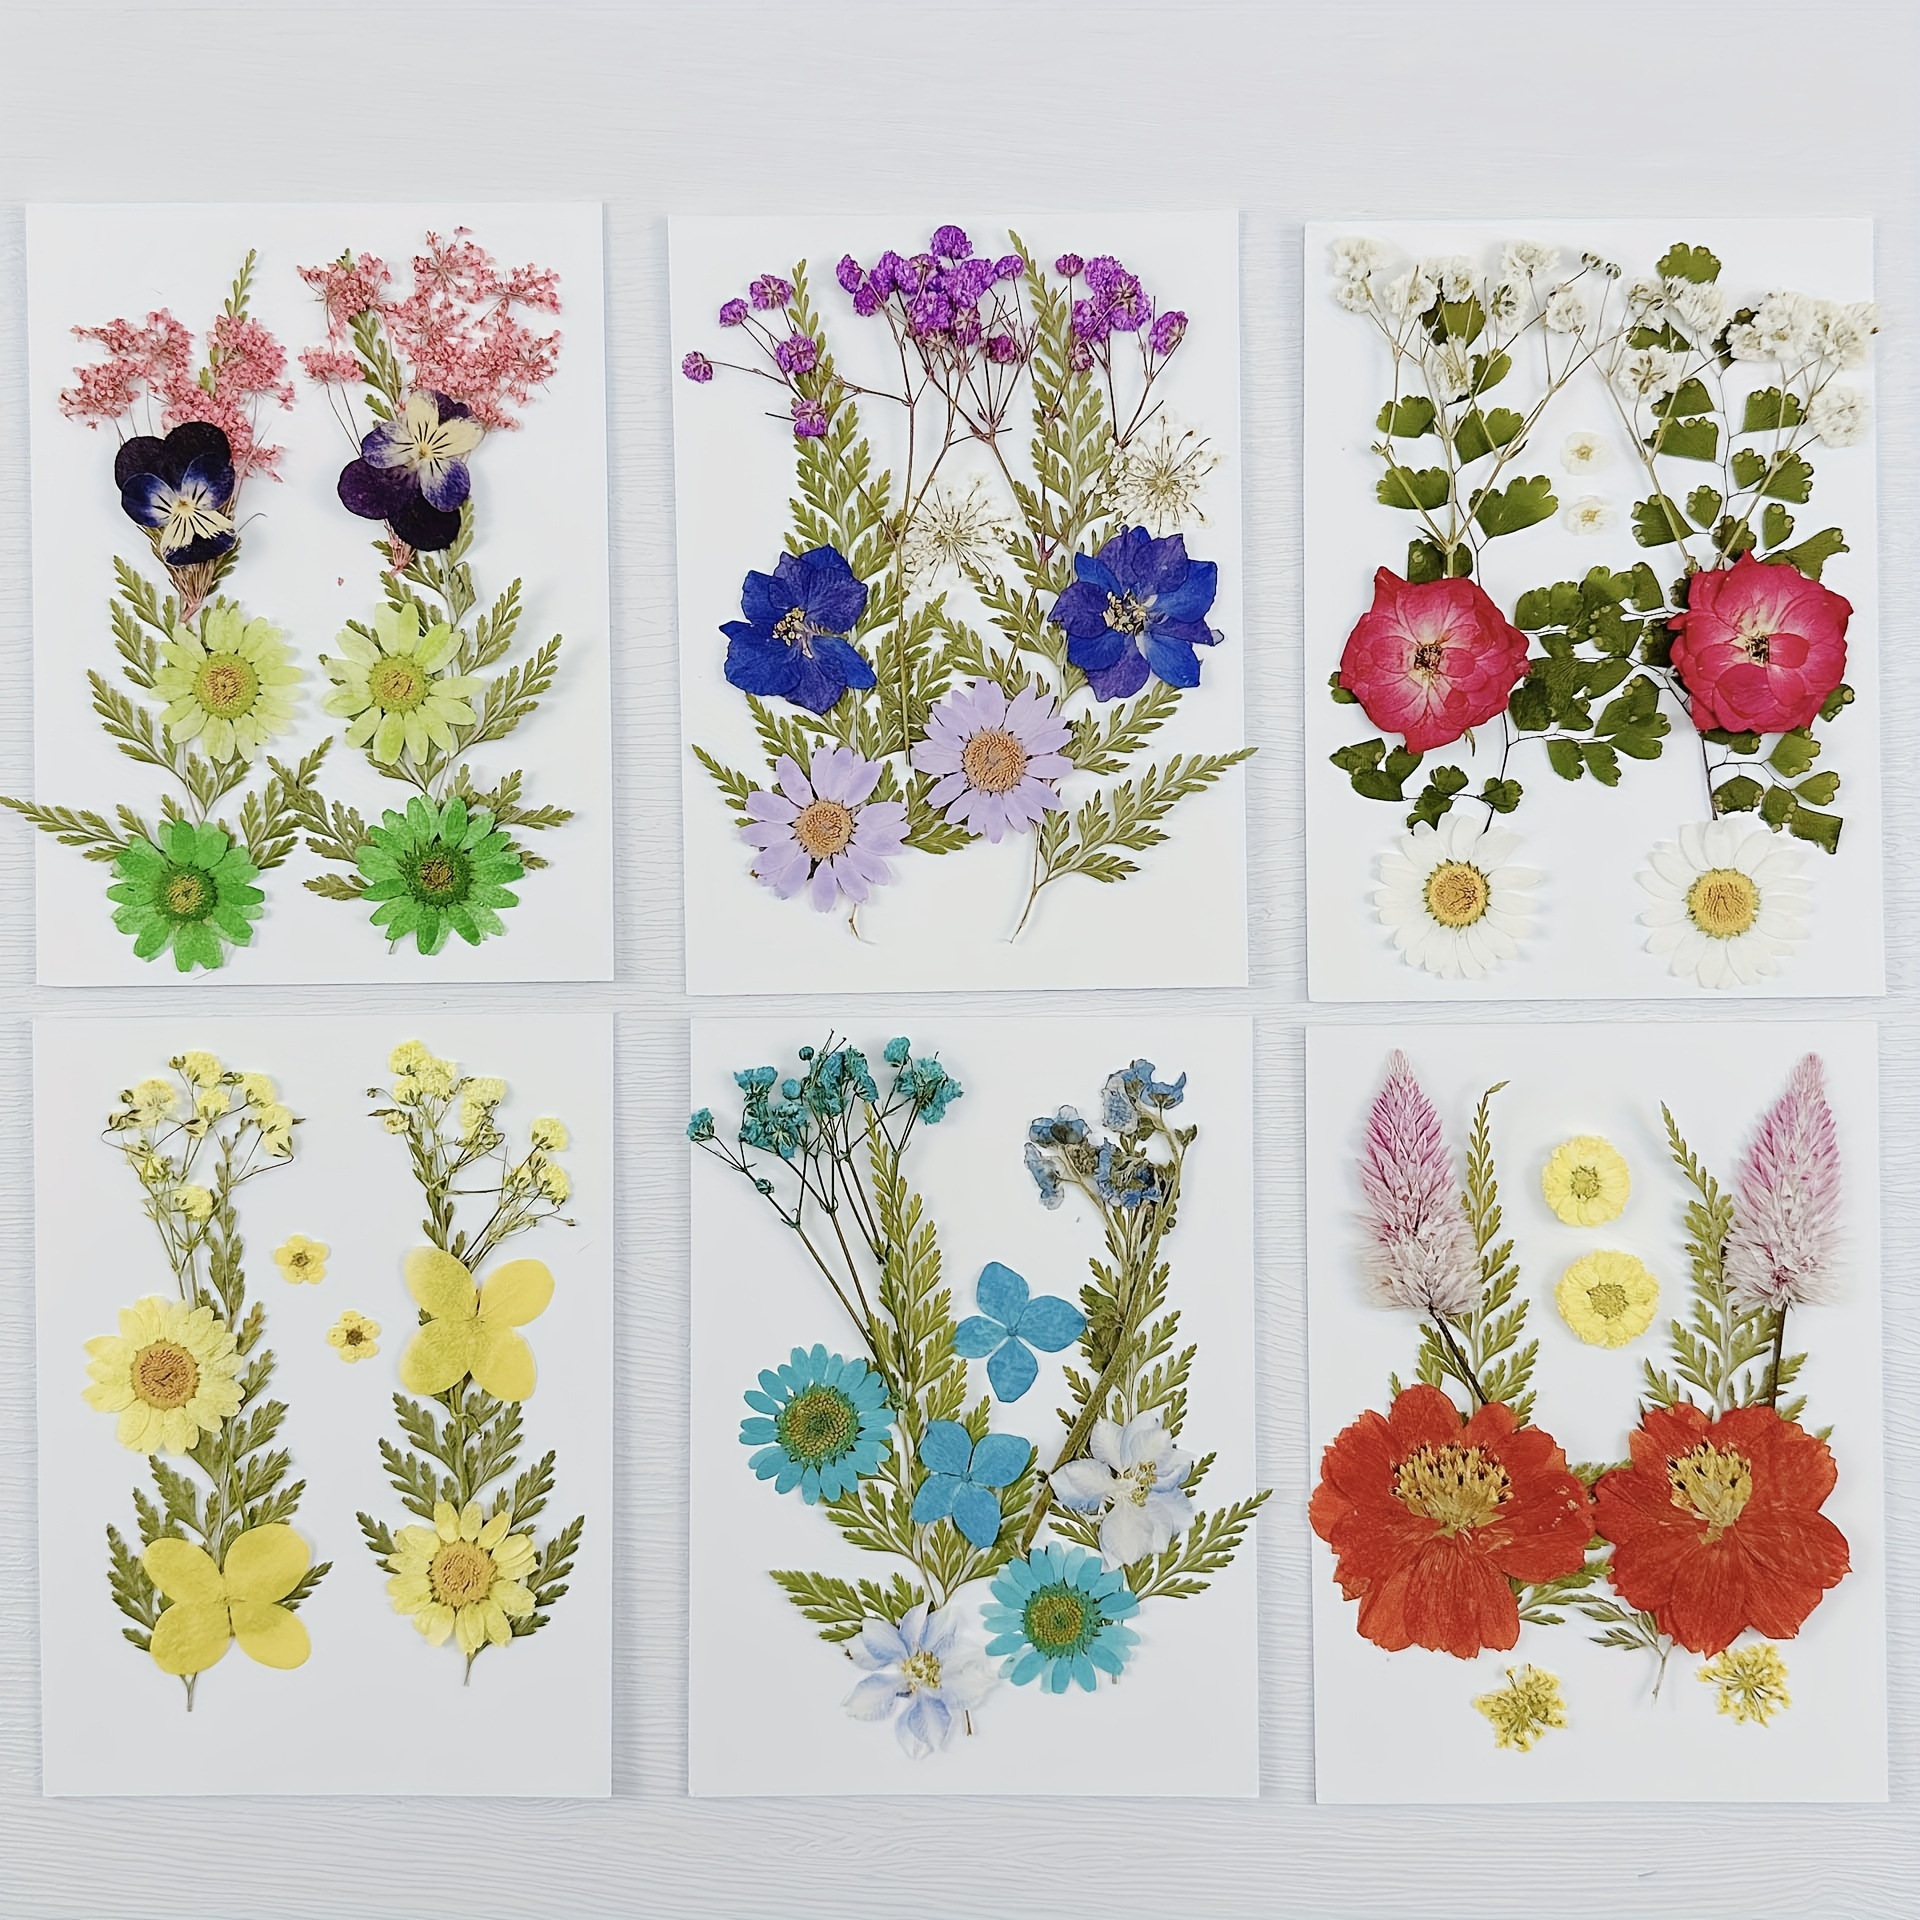 A Pack of 16pcs Dried Pressed Flowers For Crafts, Pressed Flowers